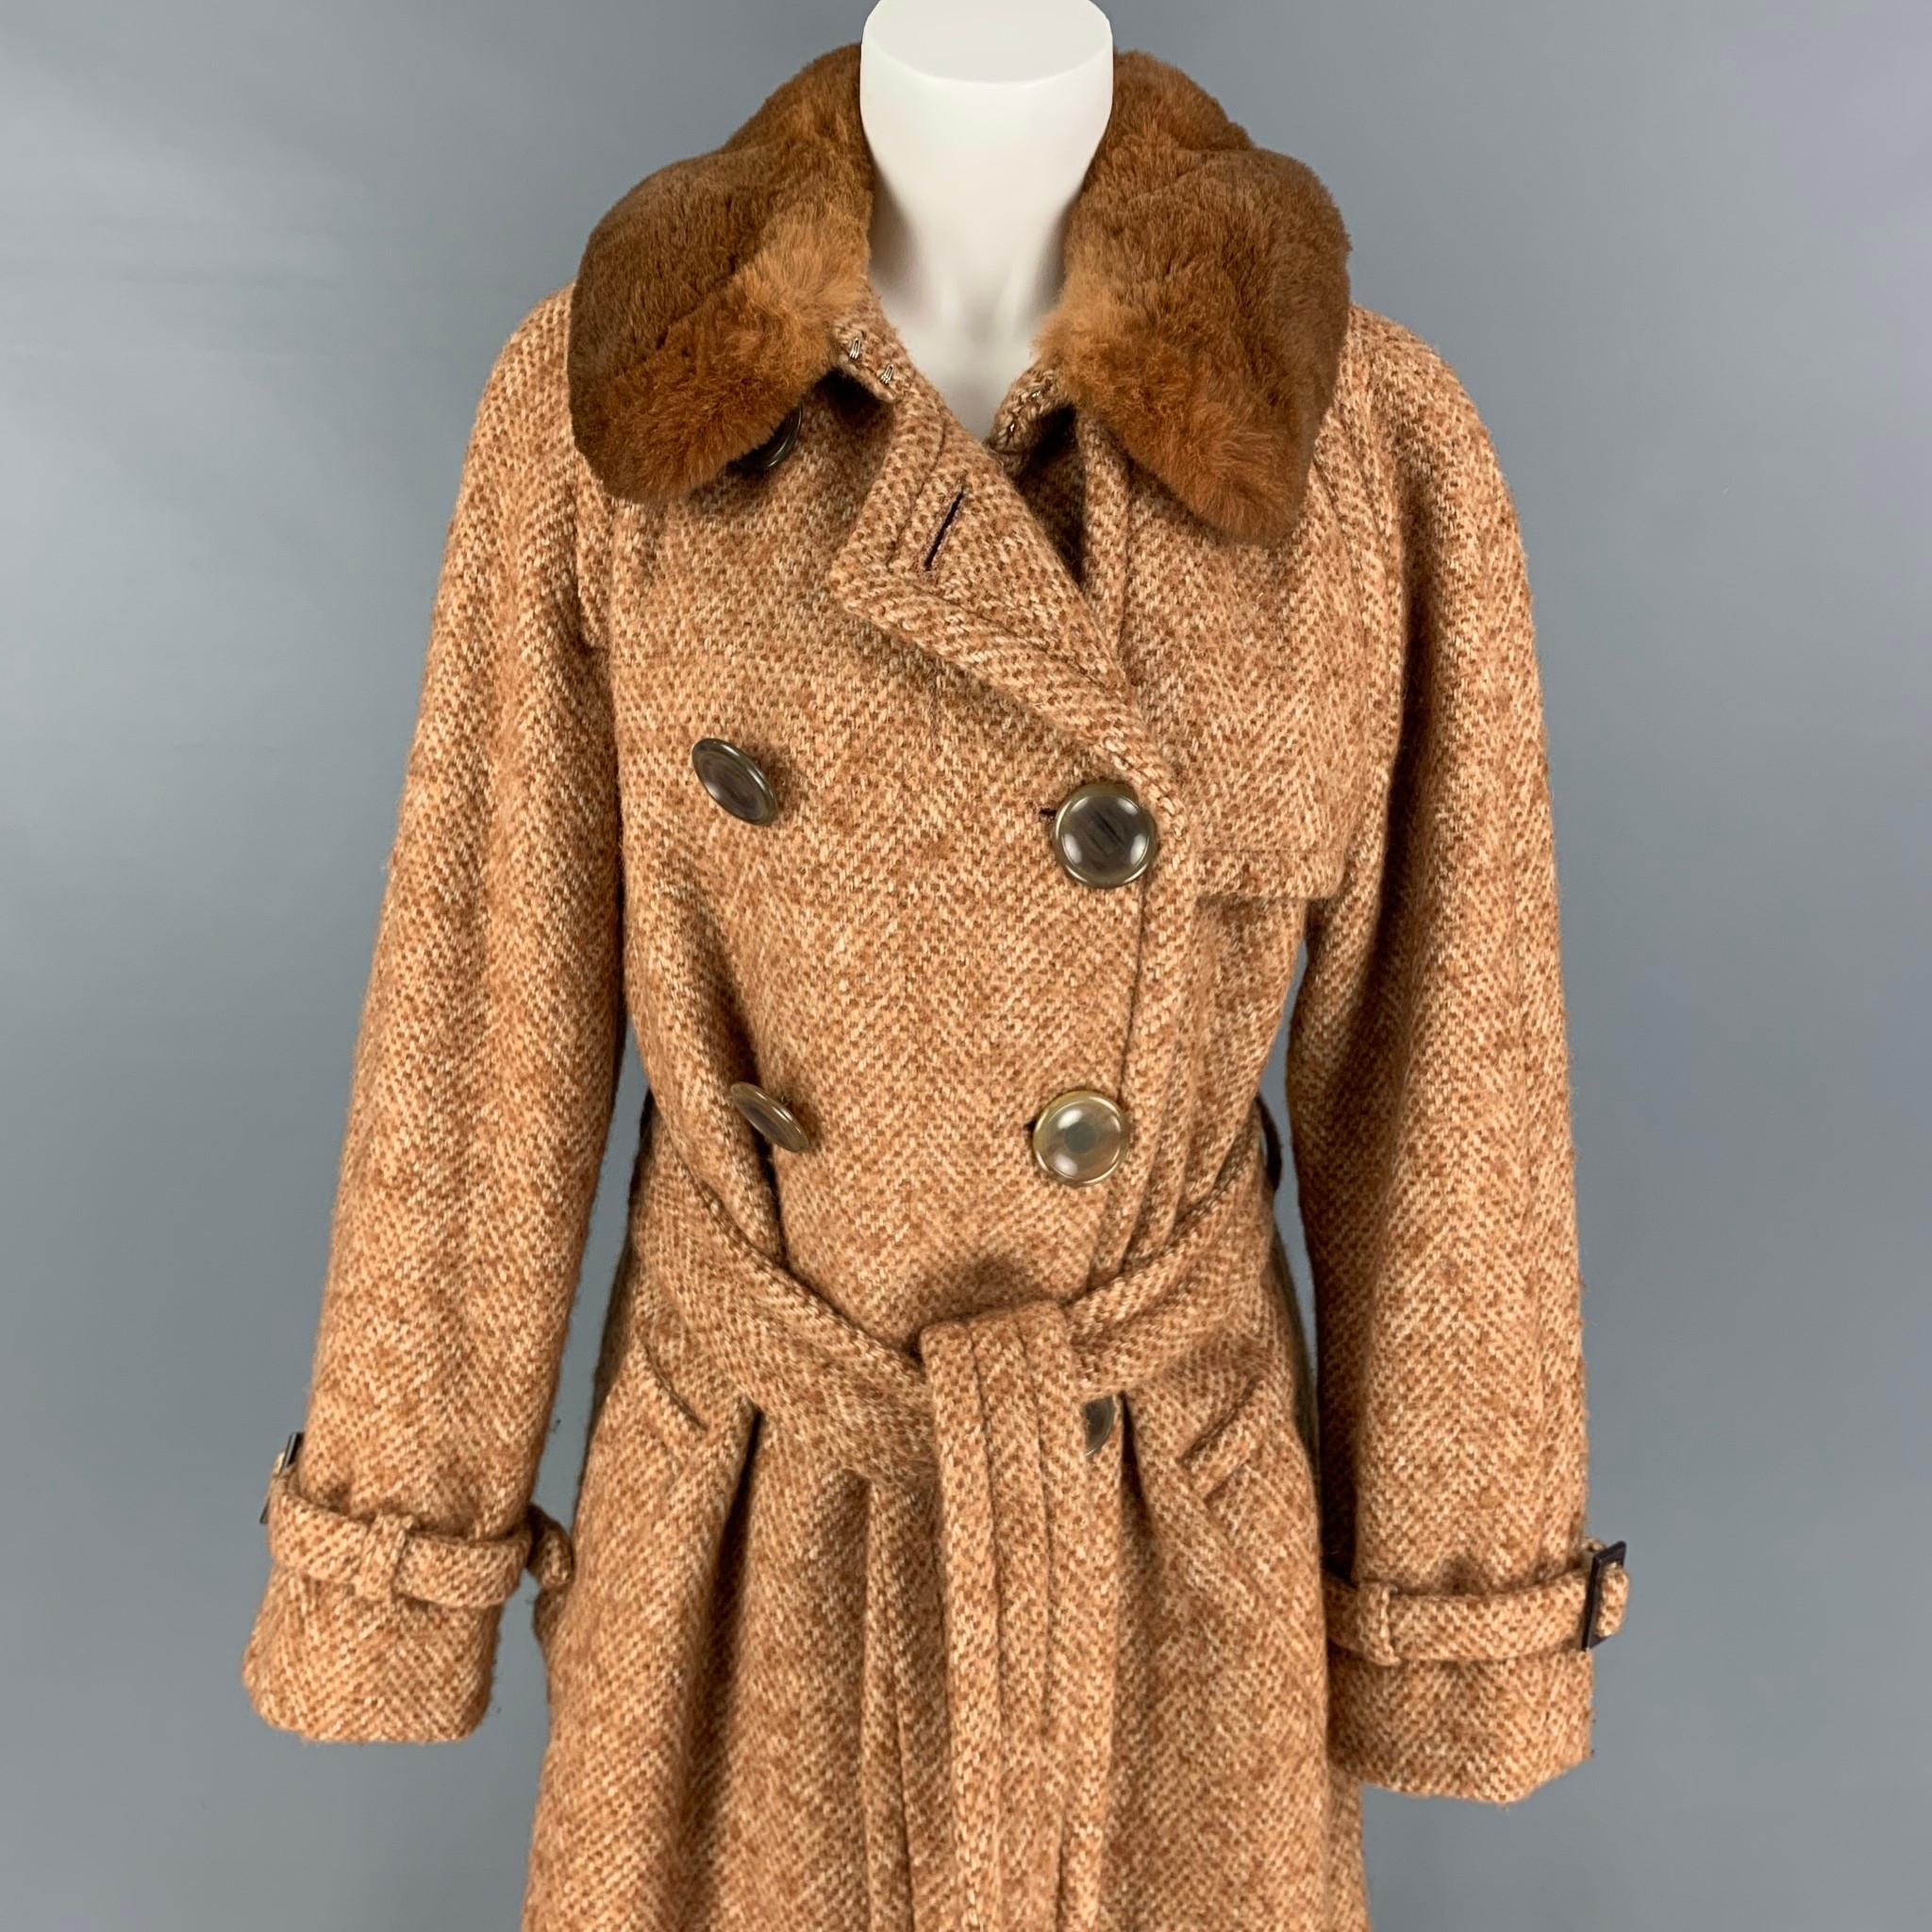 MARC JACOBS coat comes in a tan & beige tweed wool blend with a full liner featuring a faux fur collar, belted, single back vent, slit pockets, and a double breasted closure. Made in USA. 

Excellent Pre-Owned Condition.
Marked: